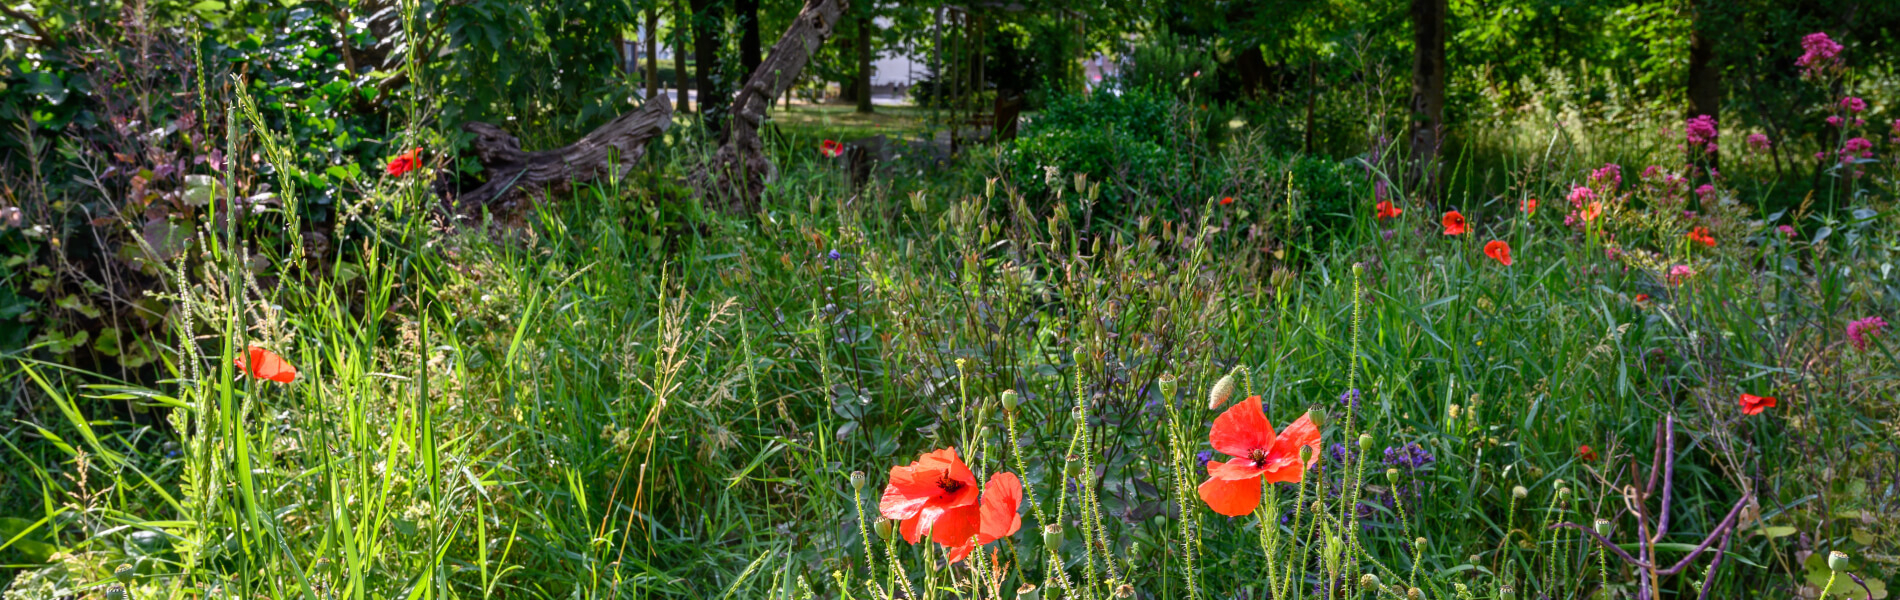 Ss college green in bromley kent this open space near the center of bromley has grass areas flowers and trees photo shows poppies and other wildflowers the borough of bromley is in gr 1